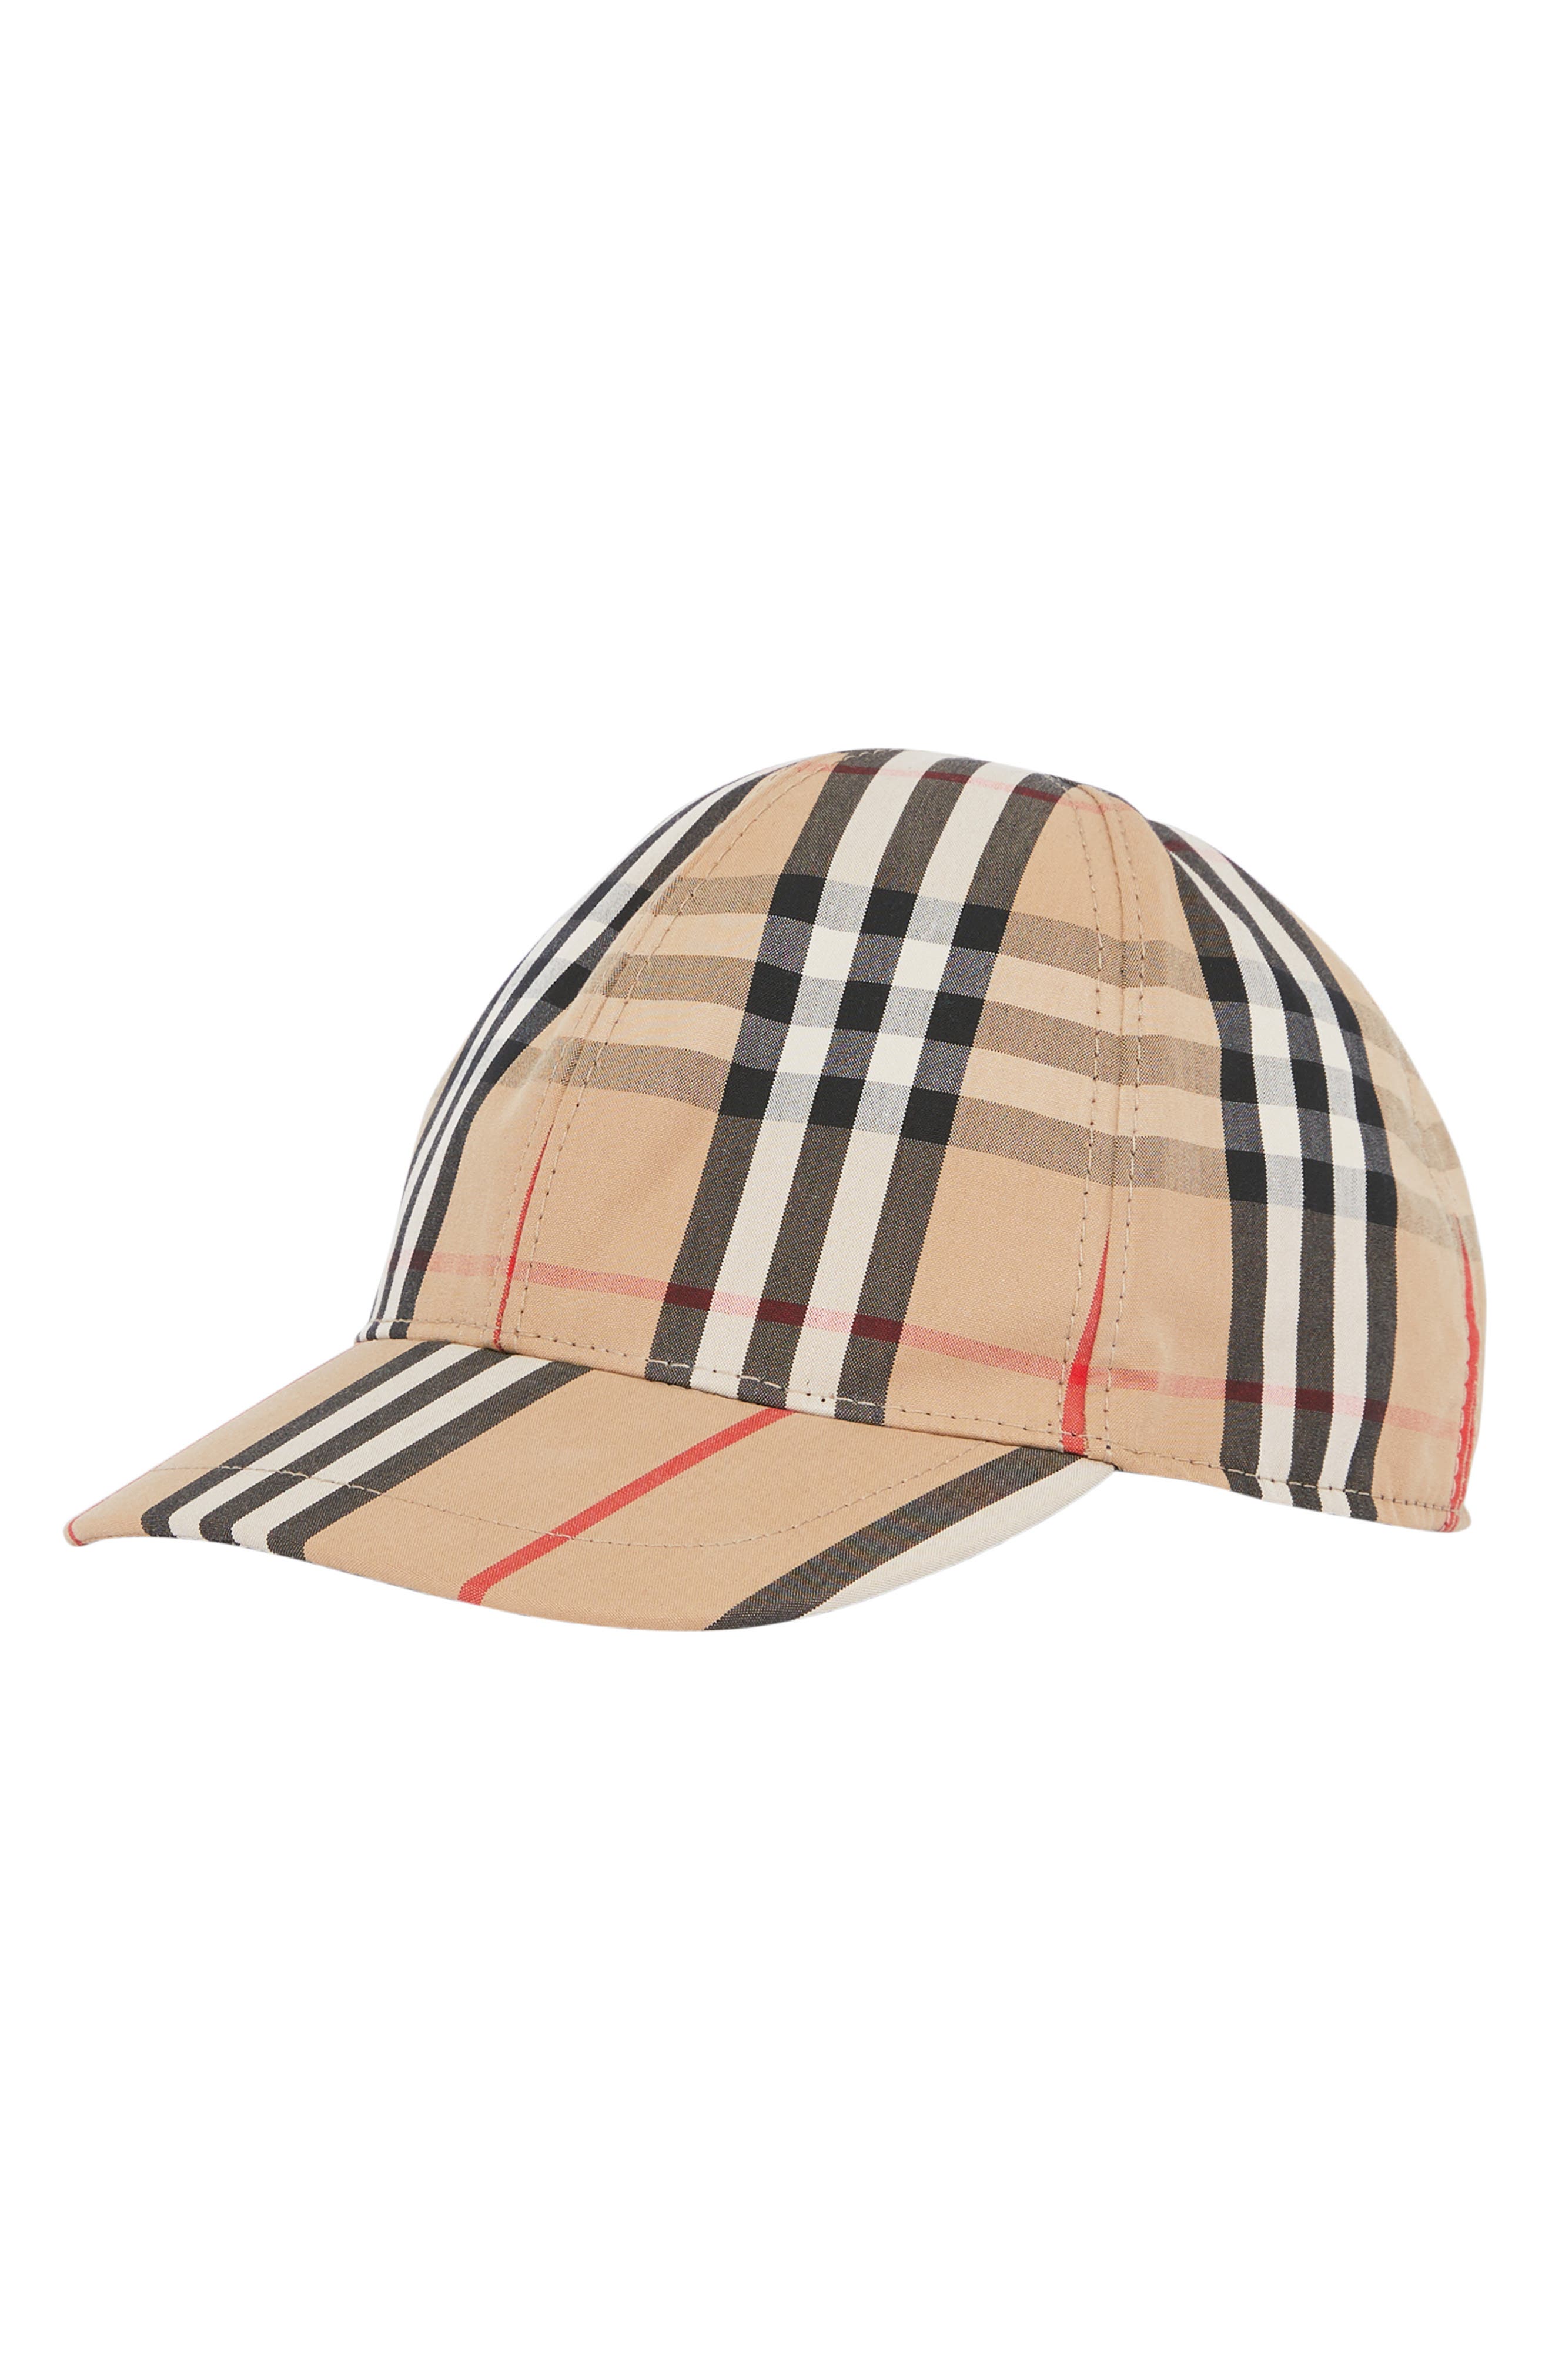 Burberry Mixed Check Baseball Cap in Archive Beige Chk at Nordstrom